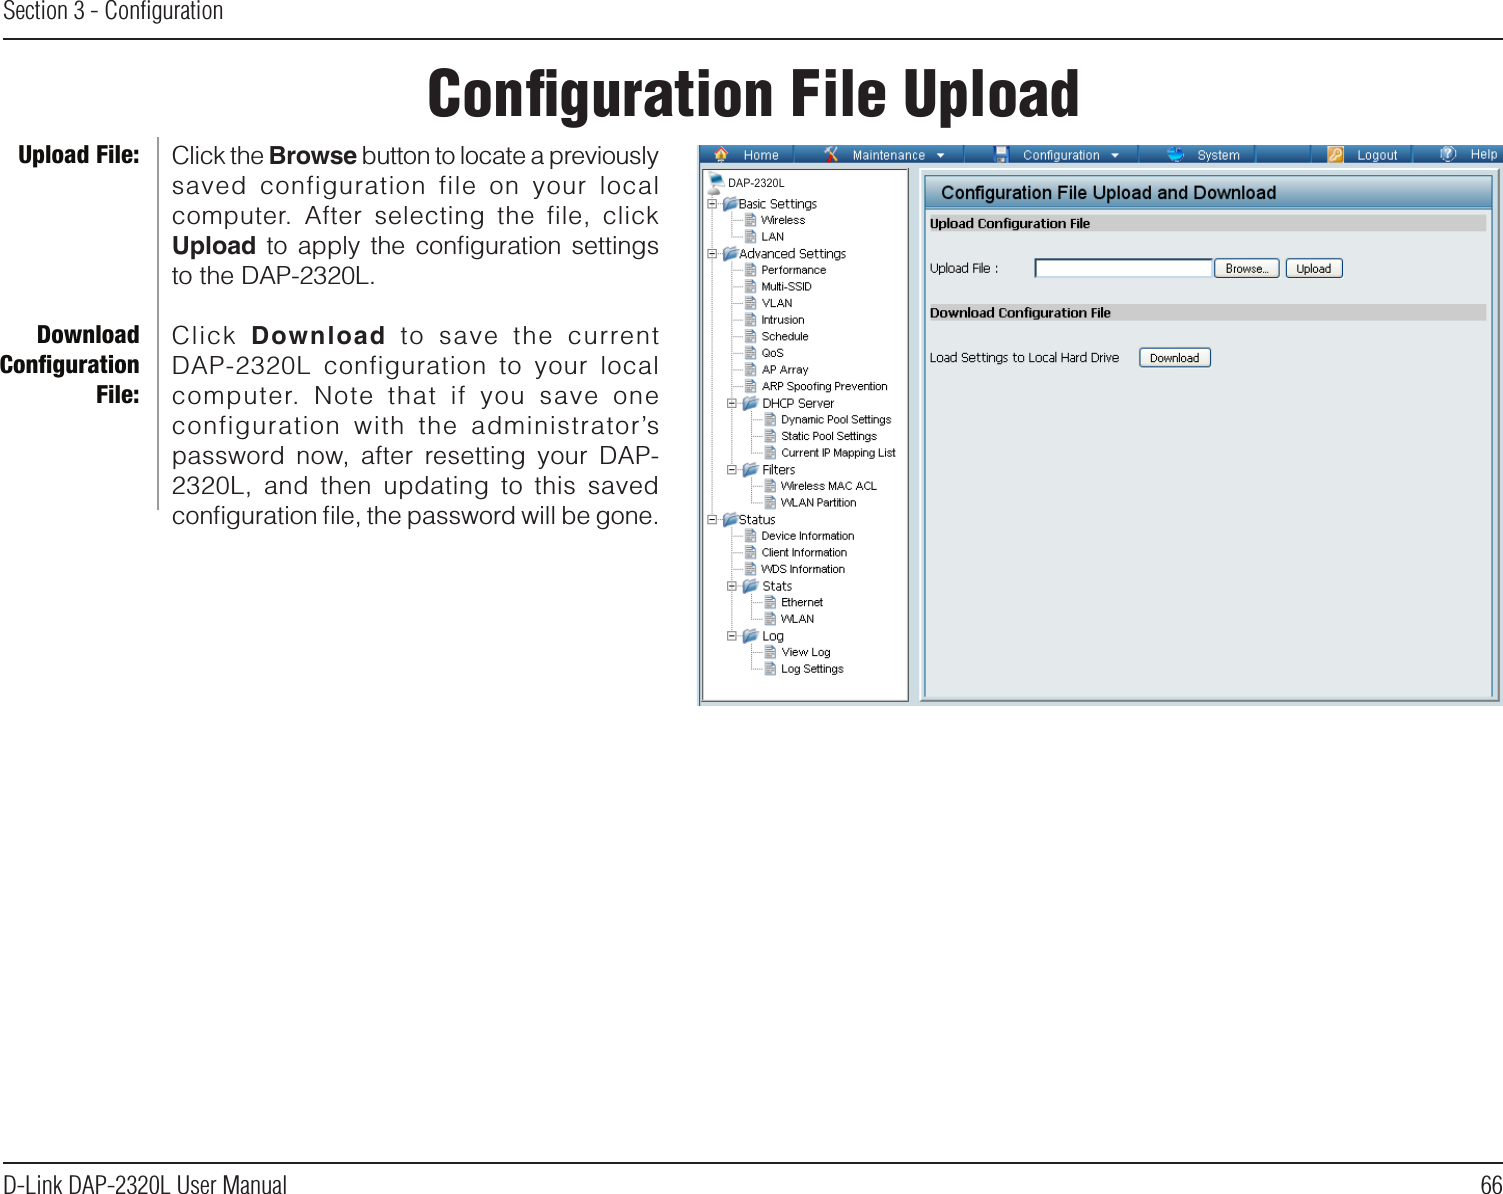 66D-Link DAP-2320L User ManualSection 3 - ConﬁgurationConﬁguration File UploadClick the Browse button to locate a previously saved  configuration  file  on  your  local computer.  After  selecting  the  file,  click Upload  to  apply  the  conﬁguration  settings to the DAP-2320L.Click  Download  to  save  the  currentDAP-2320L  configuration  to  your  local computer.  Note  that  if  you  save  one configuration  with  the  administrator’s password now,  after  resetting your  DAP-2320L,  and  then  updating  to  this  saved conﬁguration ﬁle, the password will be gone.Upload File:Download Conﬁguration File:DAP-2320L